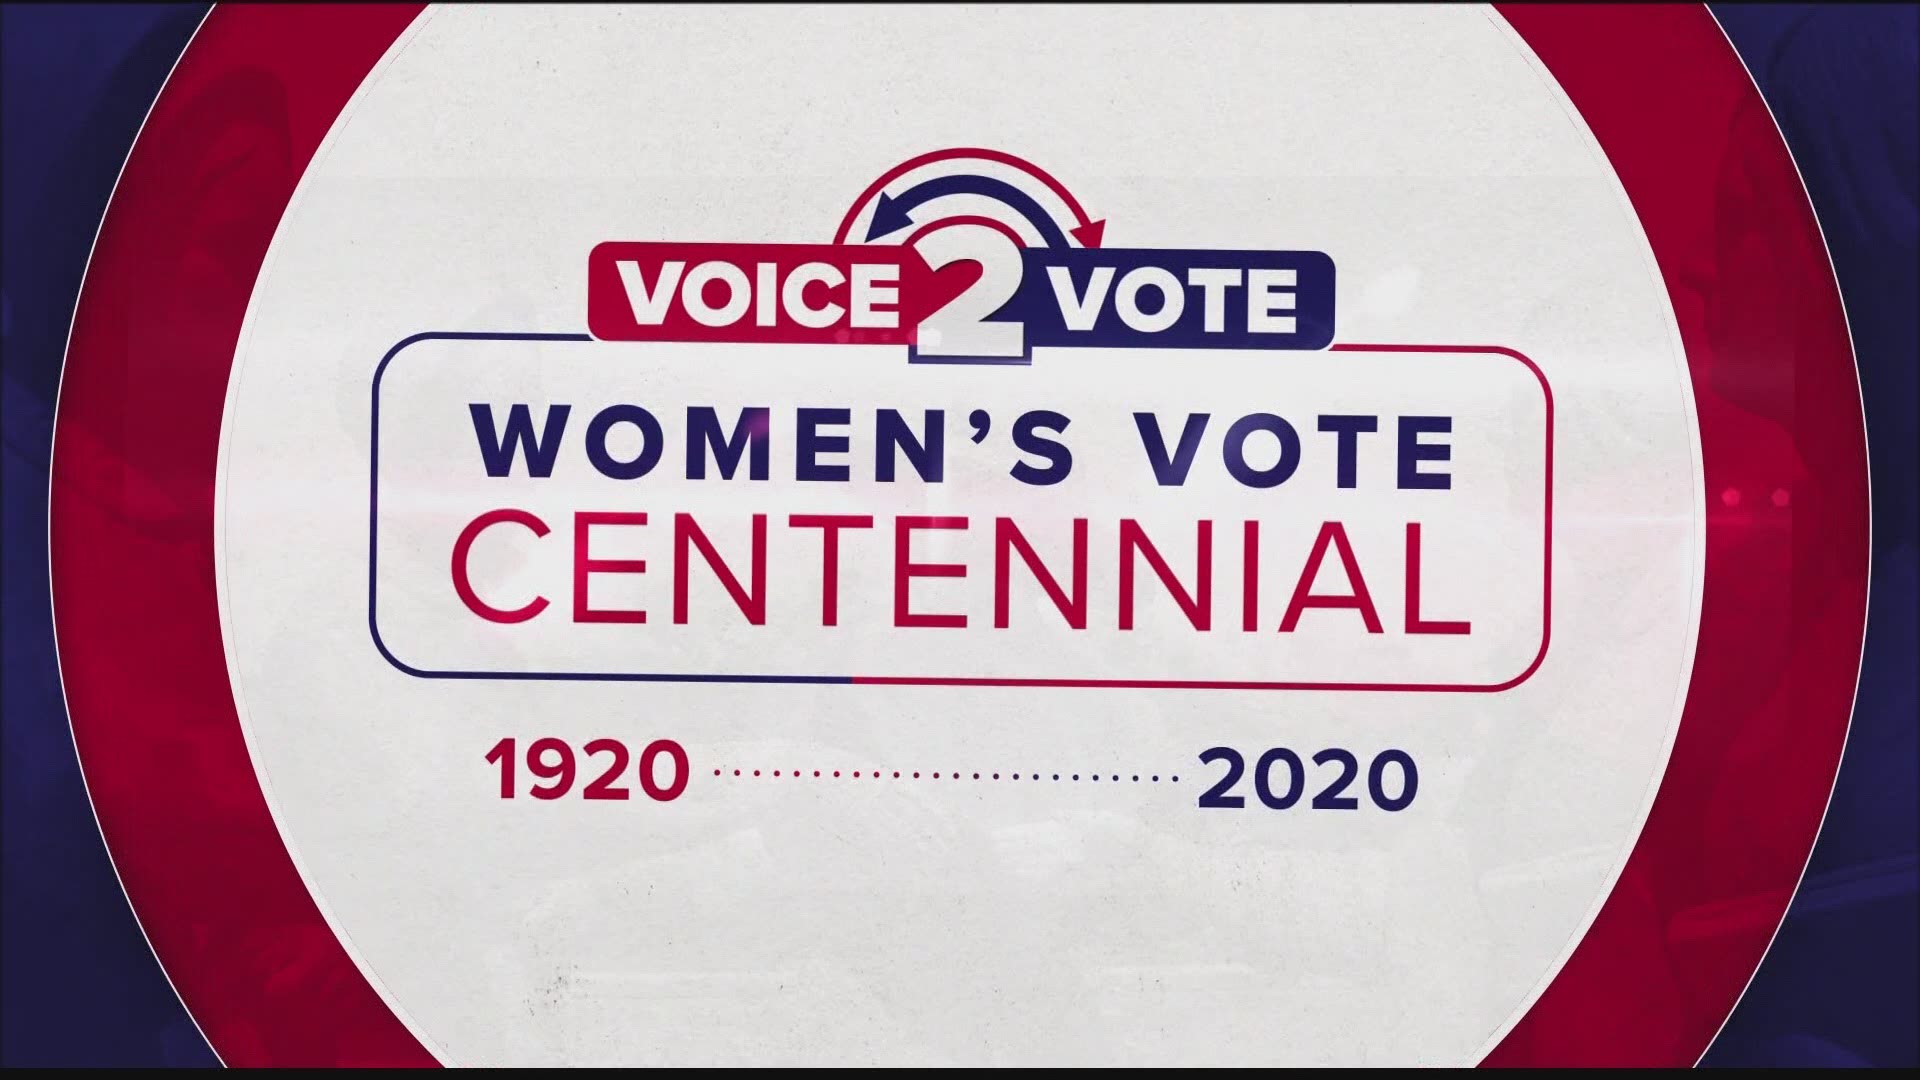 Tuesday marks the 100-year anniversary of the 19th Amendment, guaranteeing American women the right to vote.